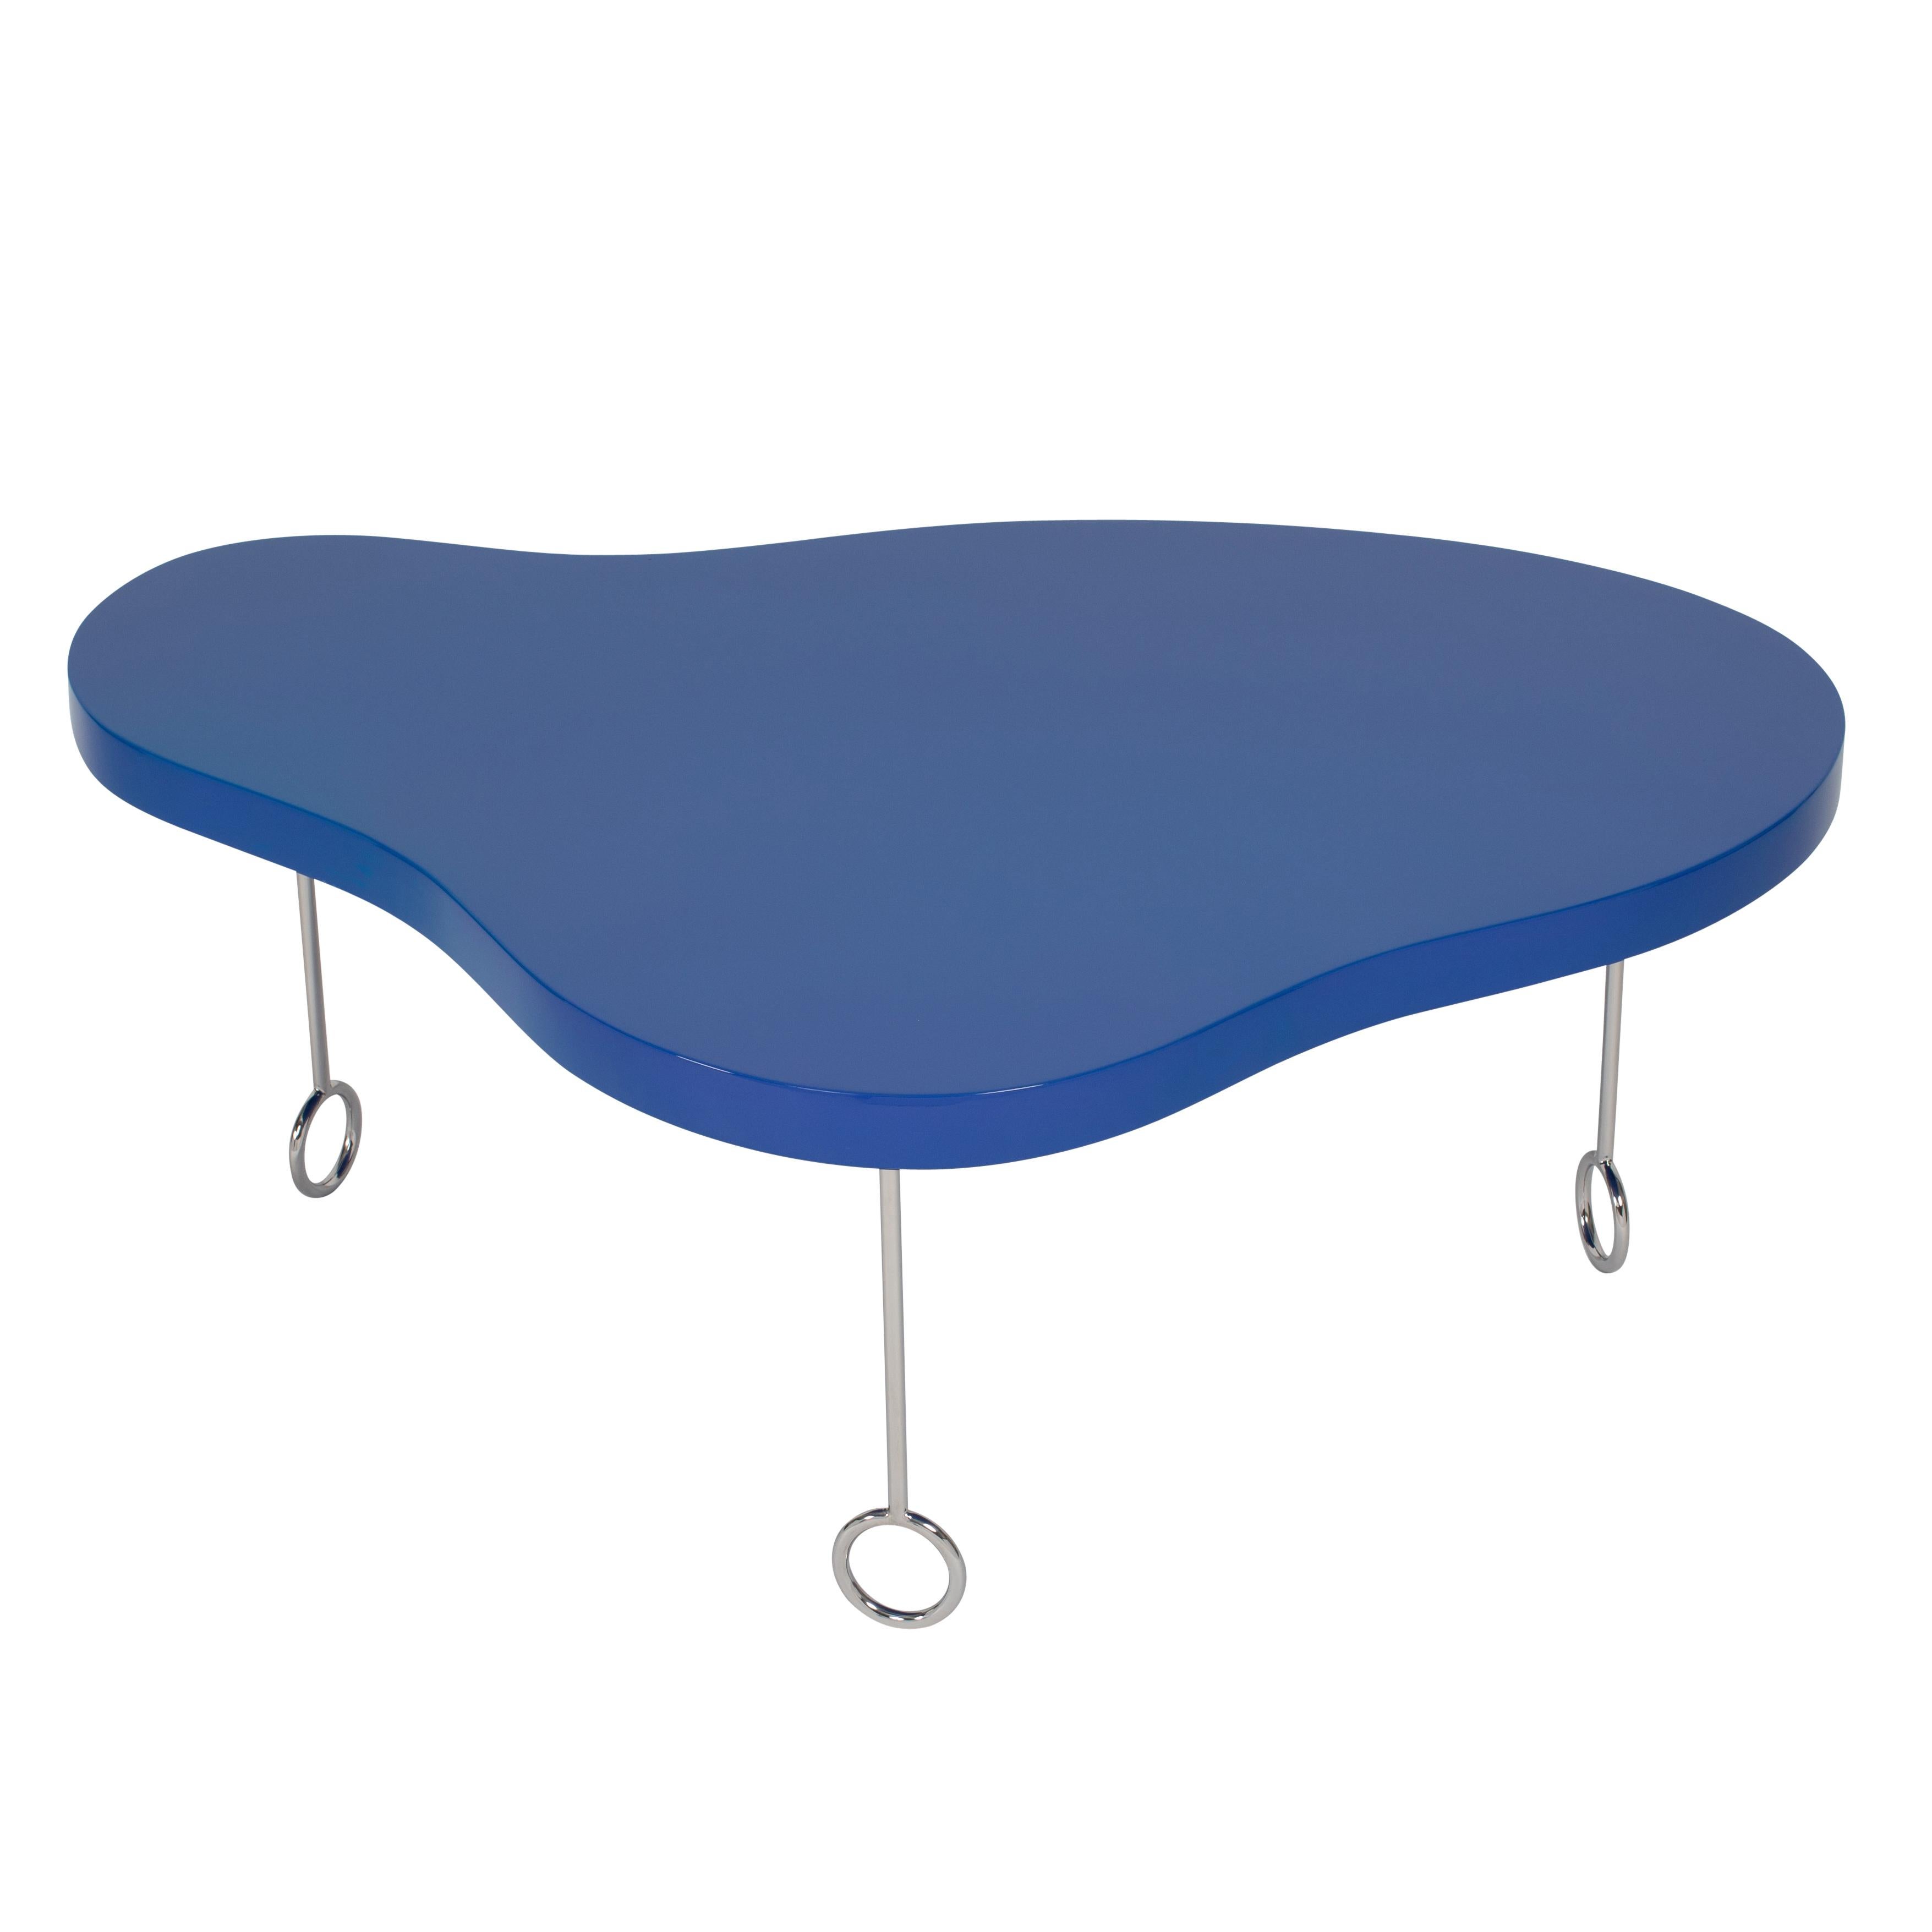 Matthews & Parker "Royale 1" Blue Biomorphic Coffee Table For Sale